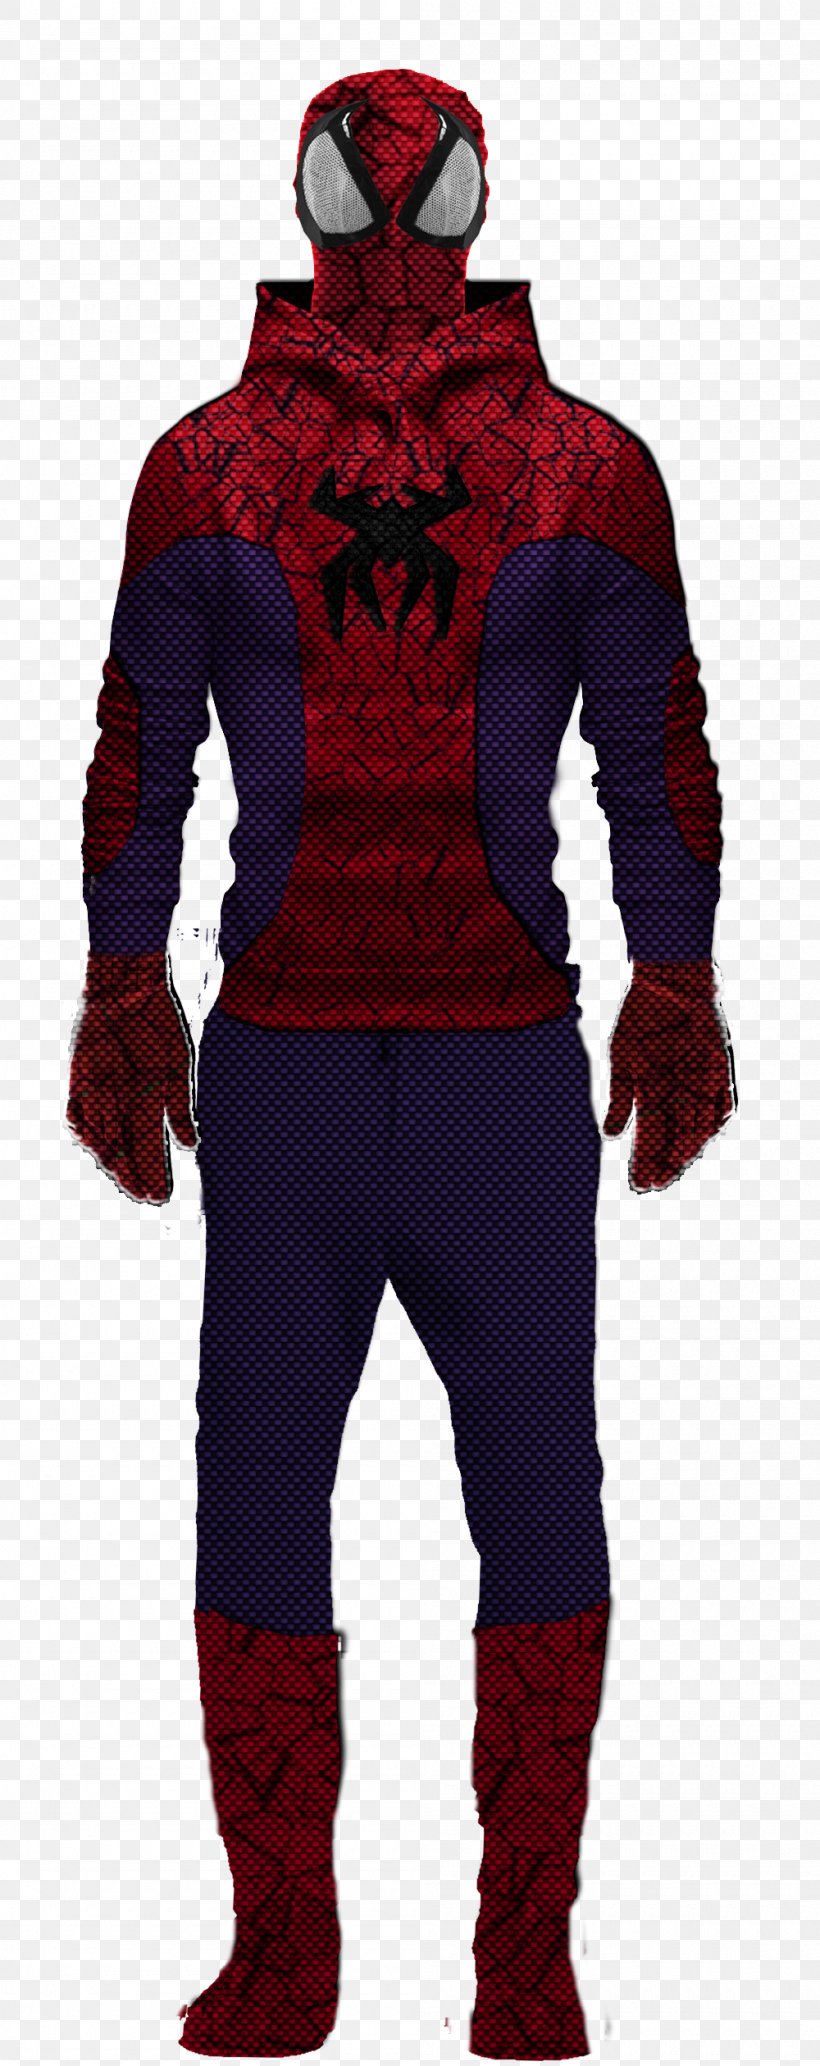 Superhero Costume, PNG, 1000x2520px, Superhero, Costume, Fictional Character, Outerwear Download Free